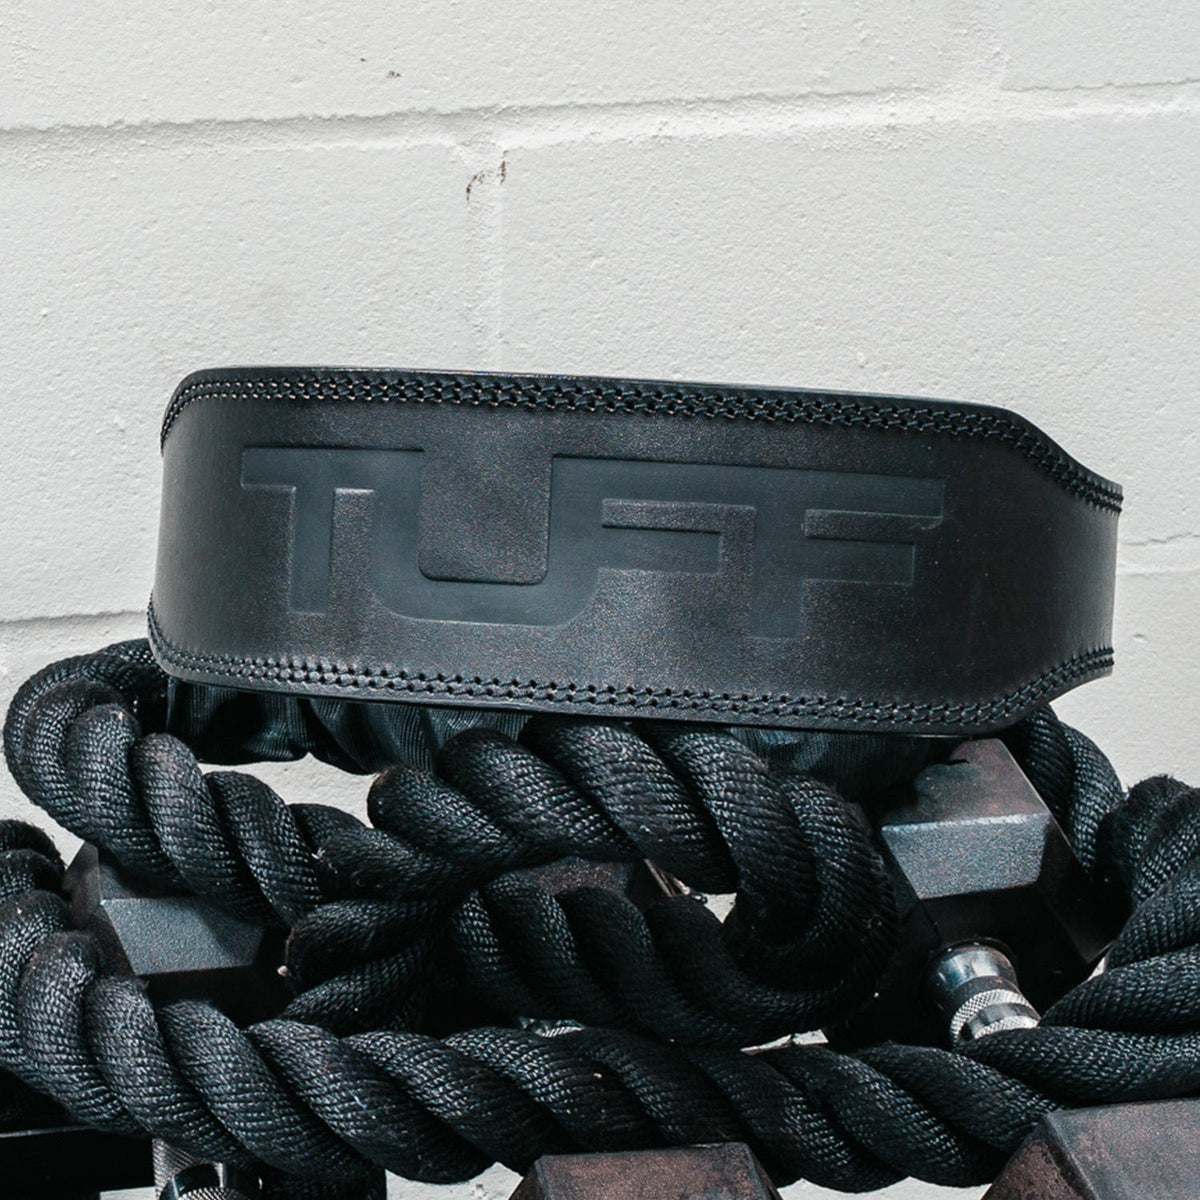 TUFF 7mm Leather Weight Lifting Belt Weight Belts